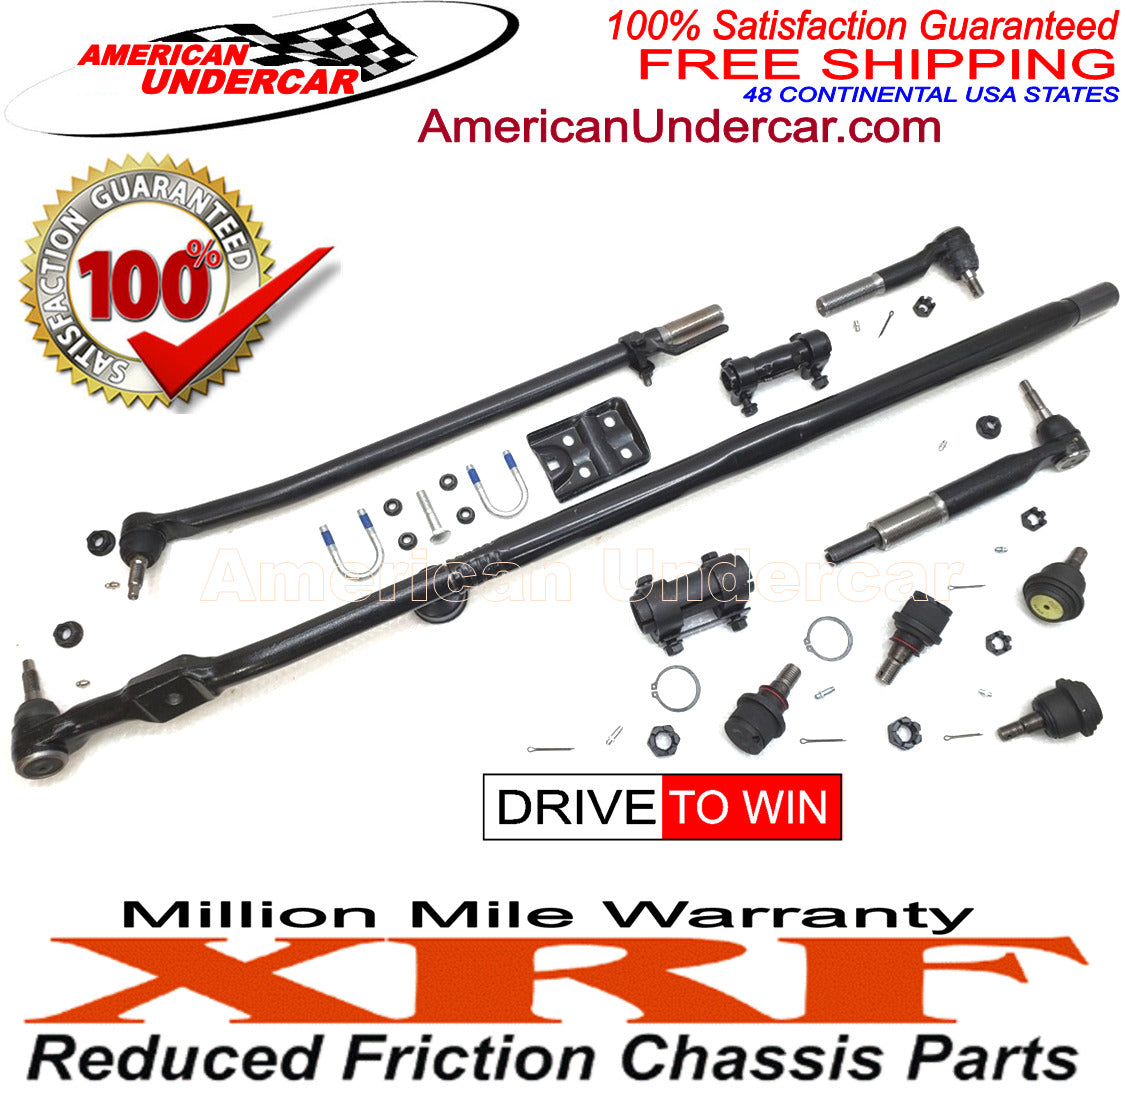 XRF Dodge Ram 2500 3500 4x4 2009 - 2012 New T Design Steering and Suspension Kit